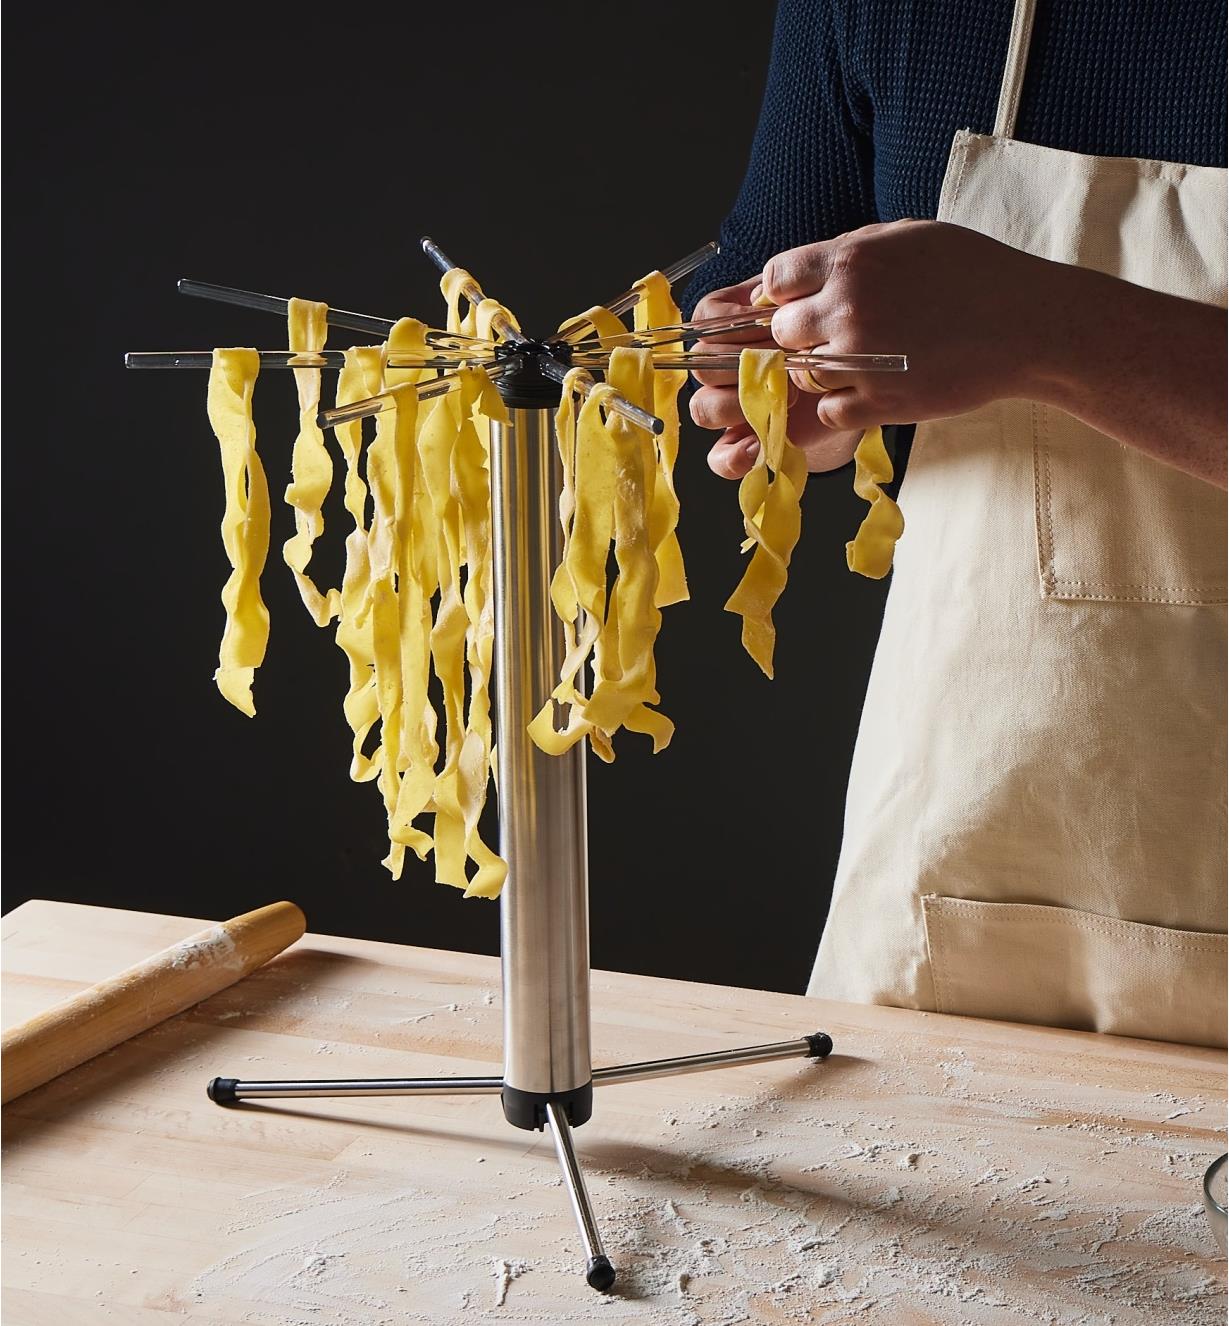 Draping pasta onto the Collapsible Pasta Drying Rack to dry